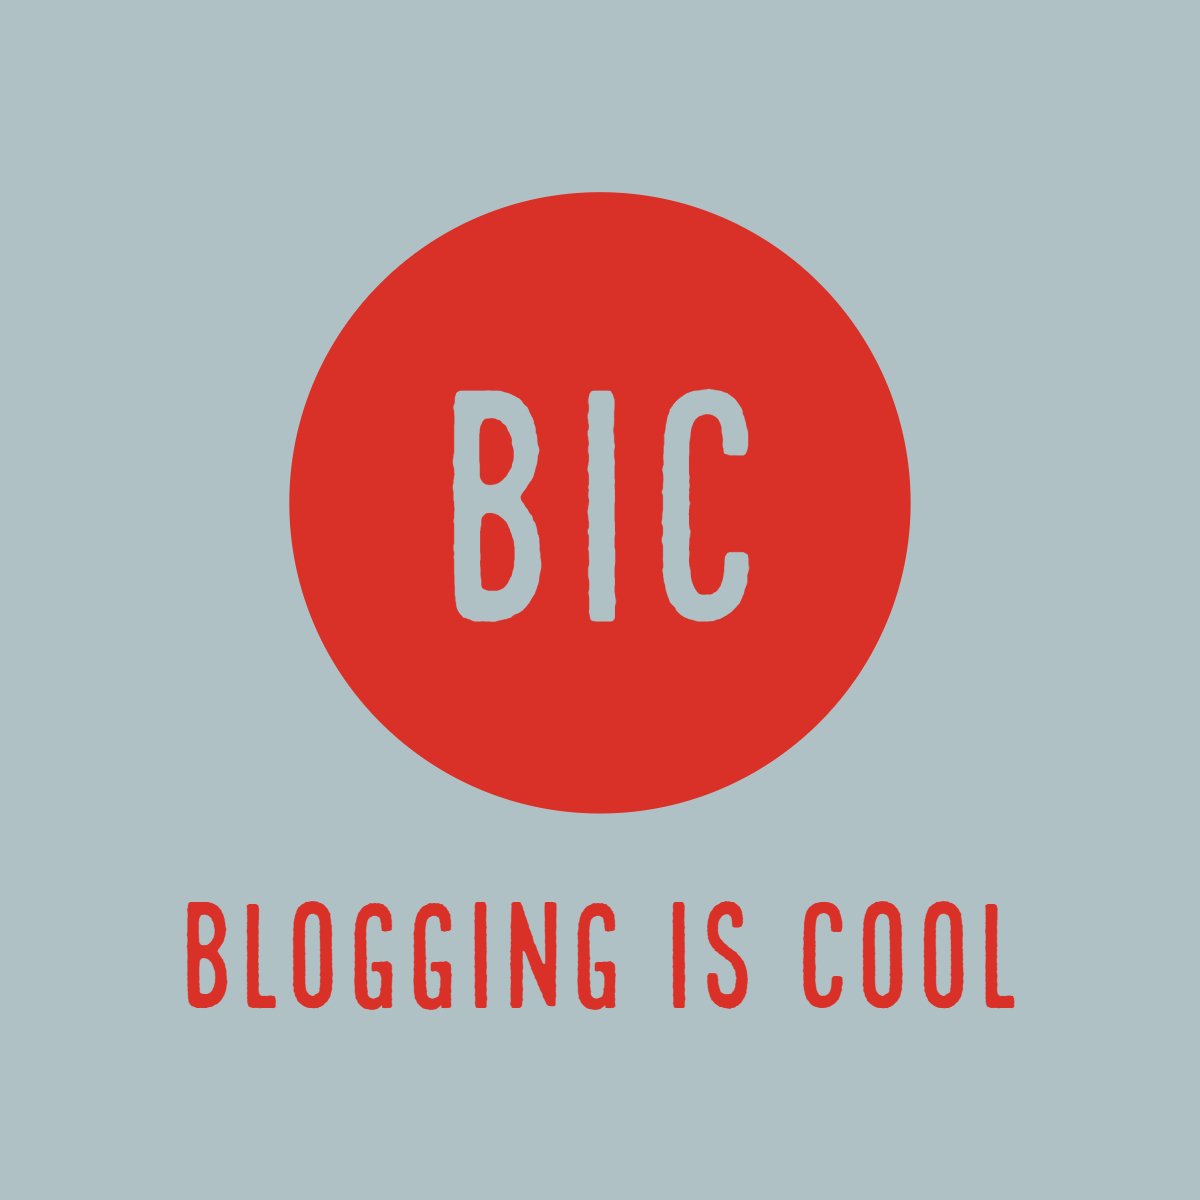 Bloggingiscool.com How to Combine SEO and Content Marketing for Your Small Blog